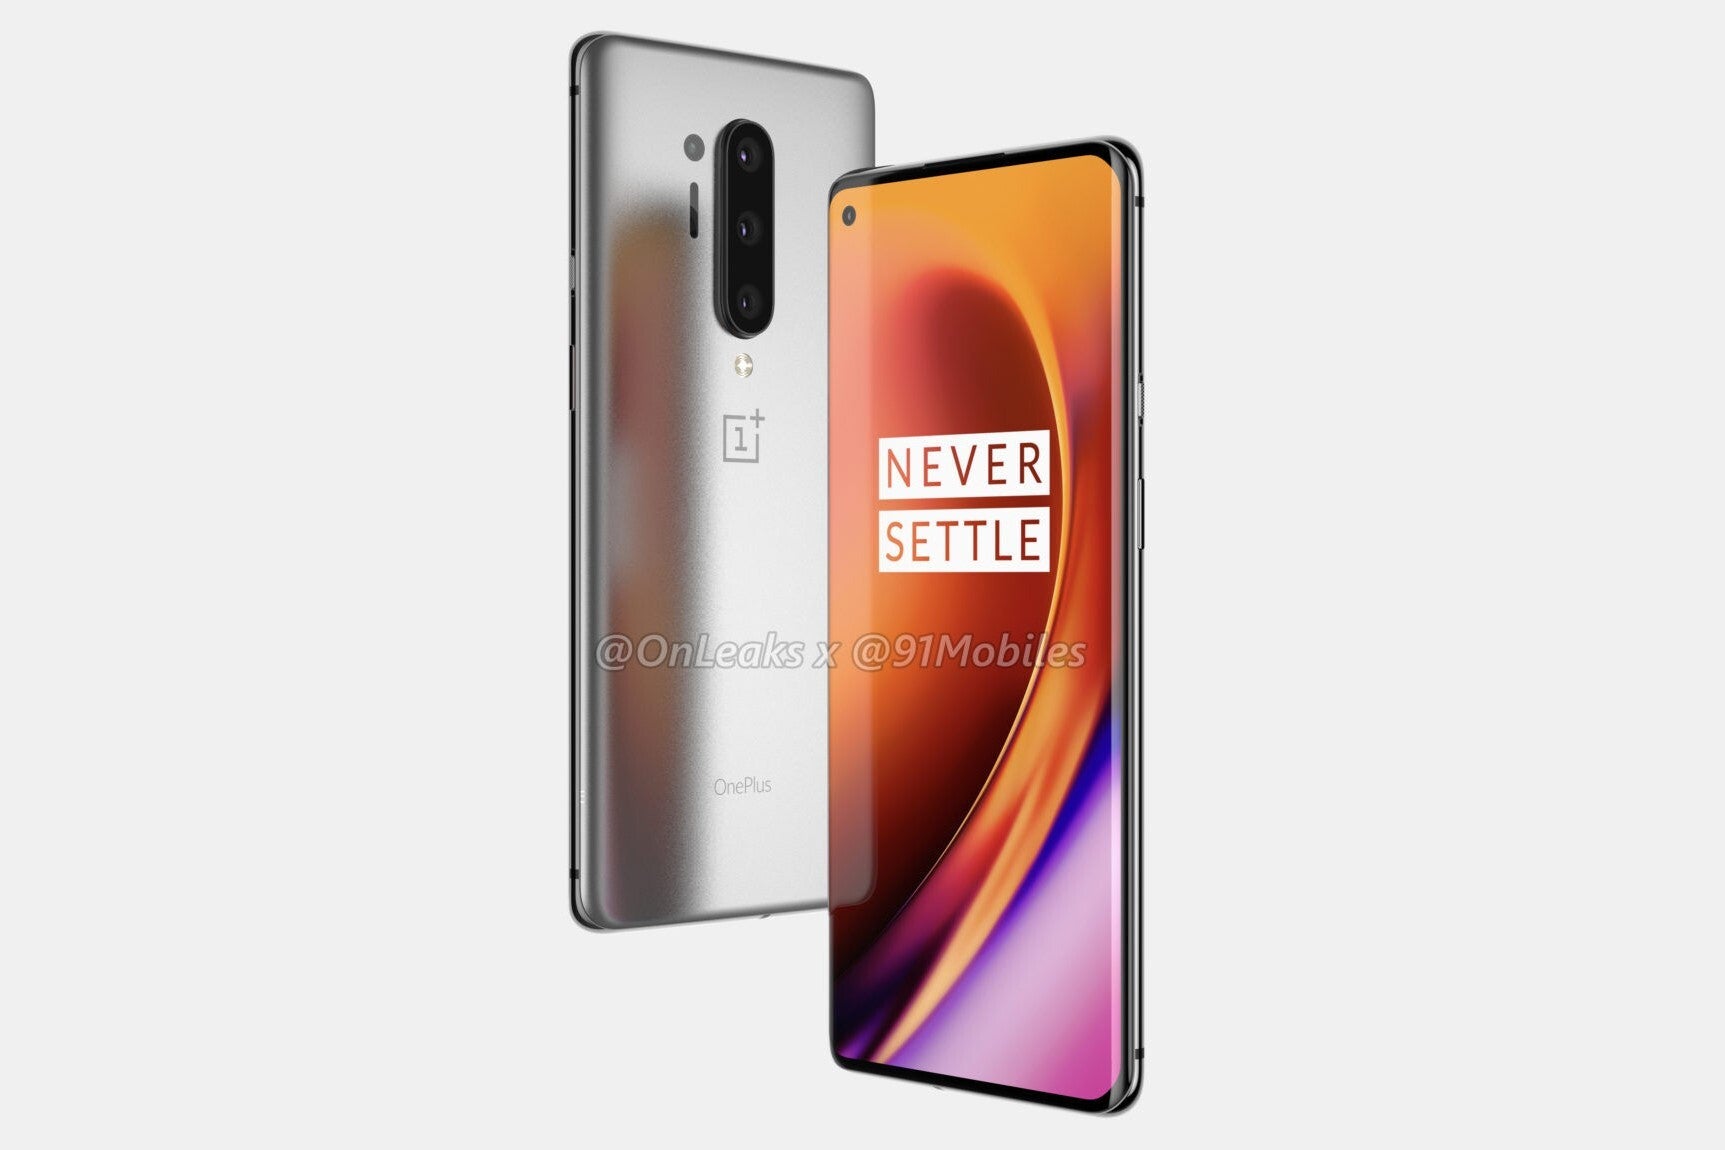 The OnePlus 8 Pro might finally introduce wireless charging support